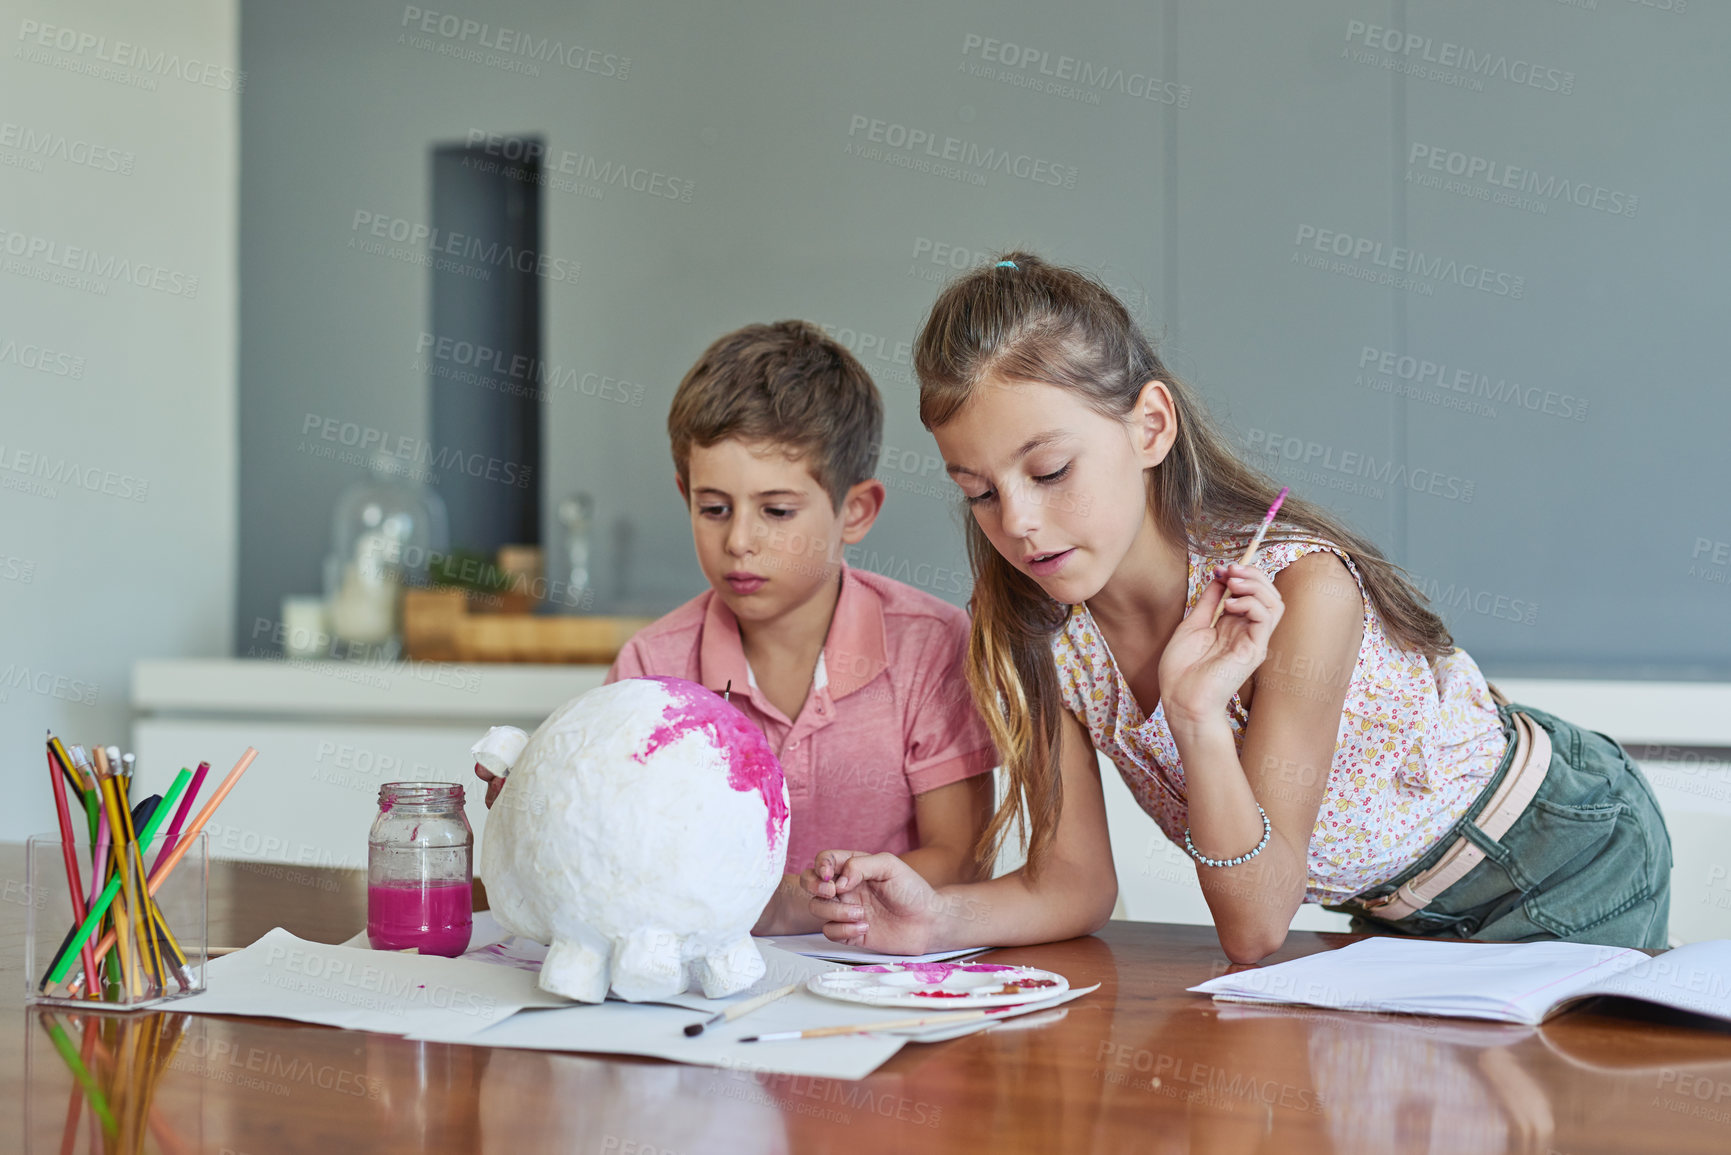 Buy stock photo Shot of two adorable little siblings painting together at home